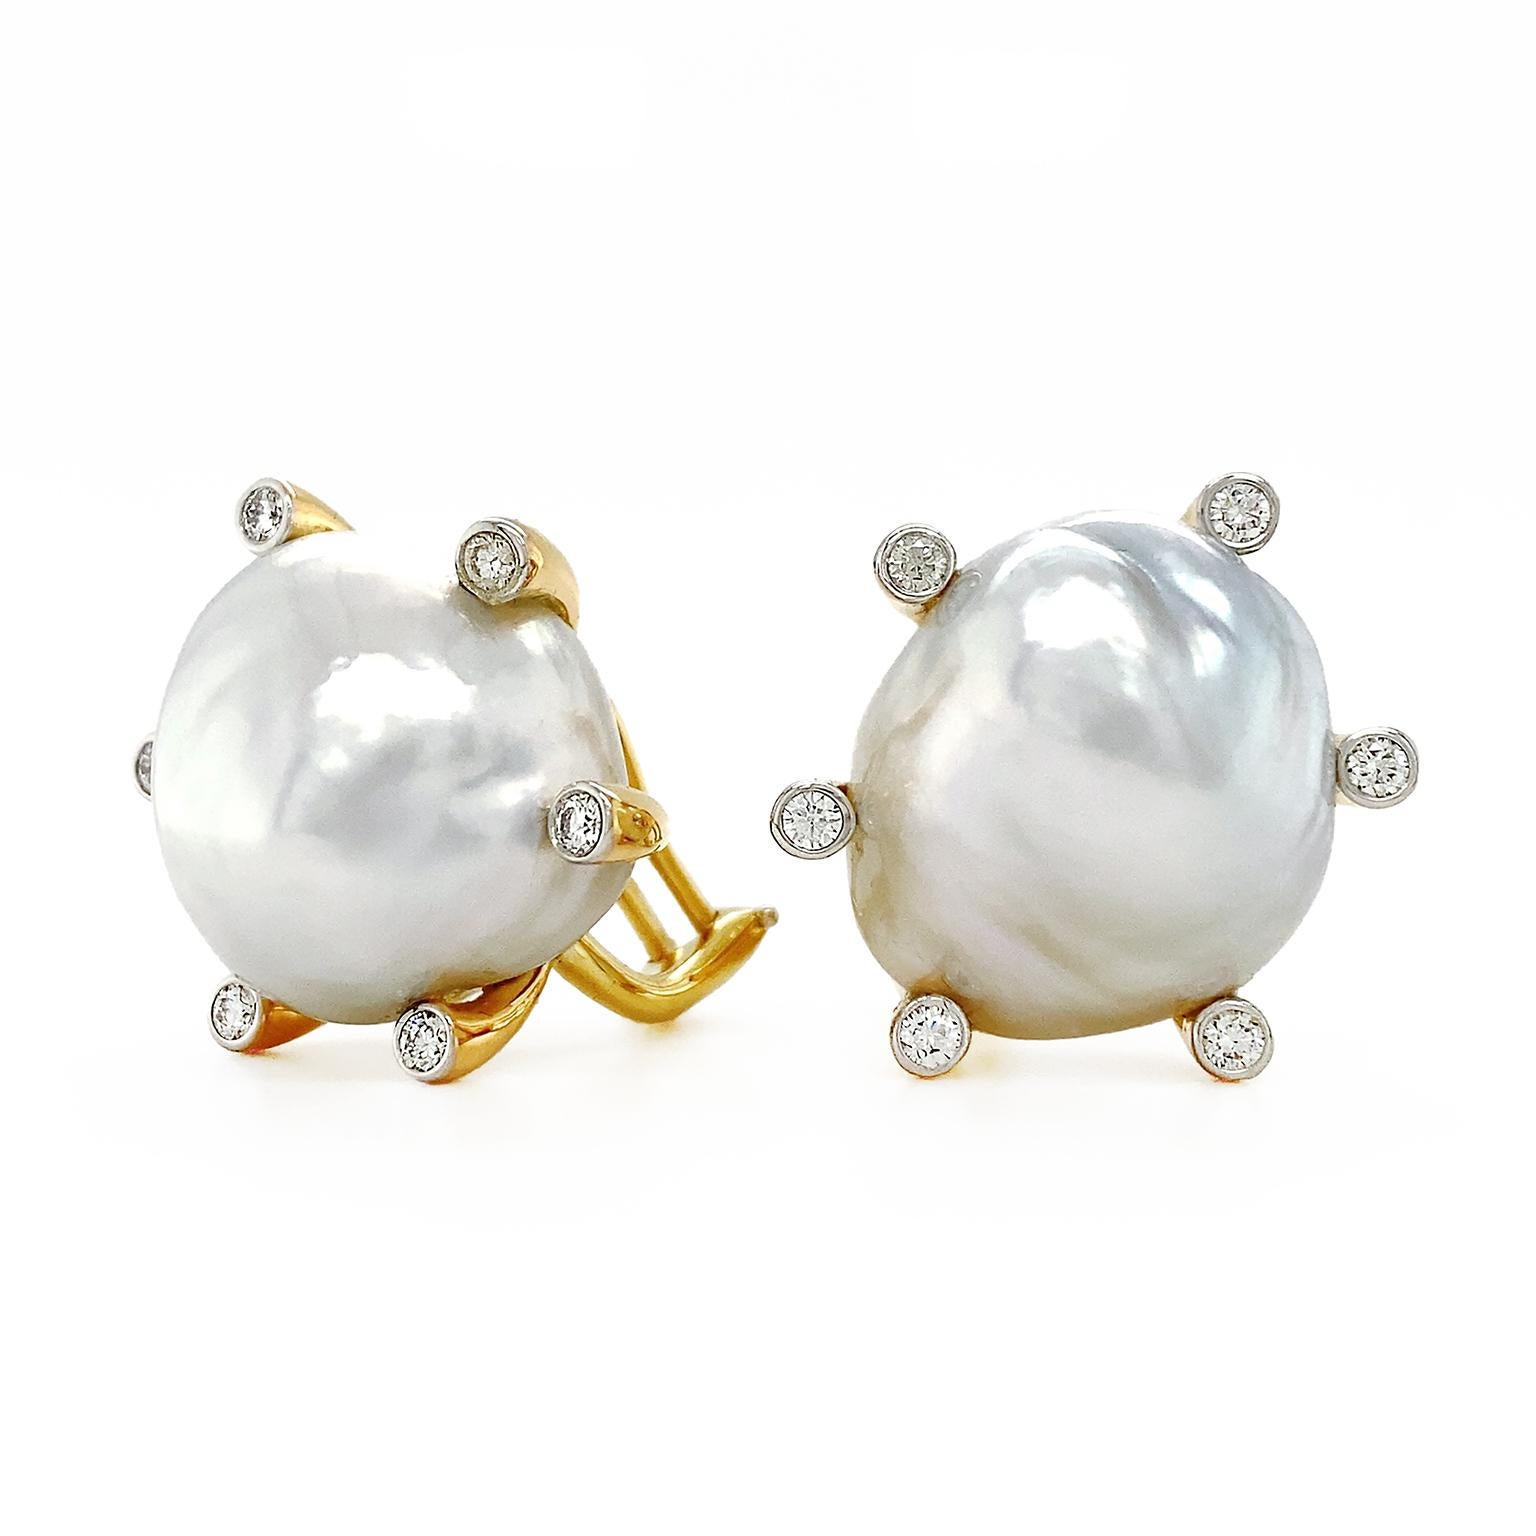 Contemporary Baroque Pearl and Diamond Earrings